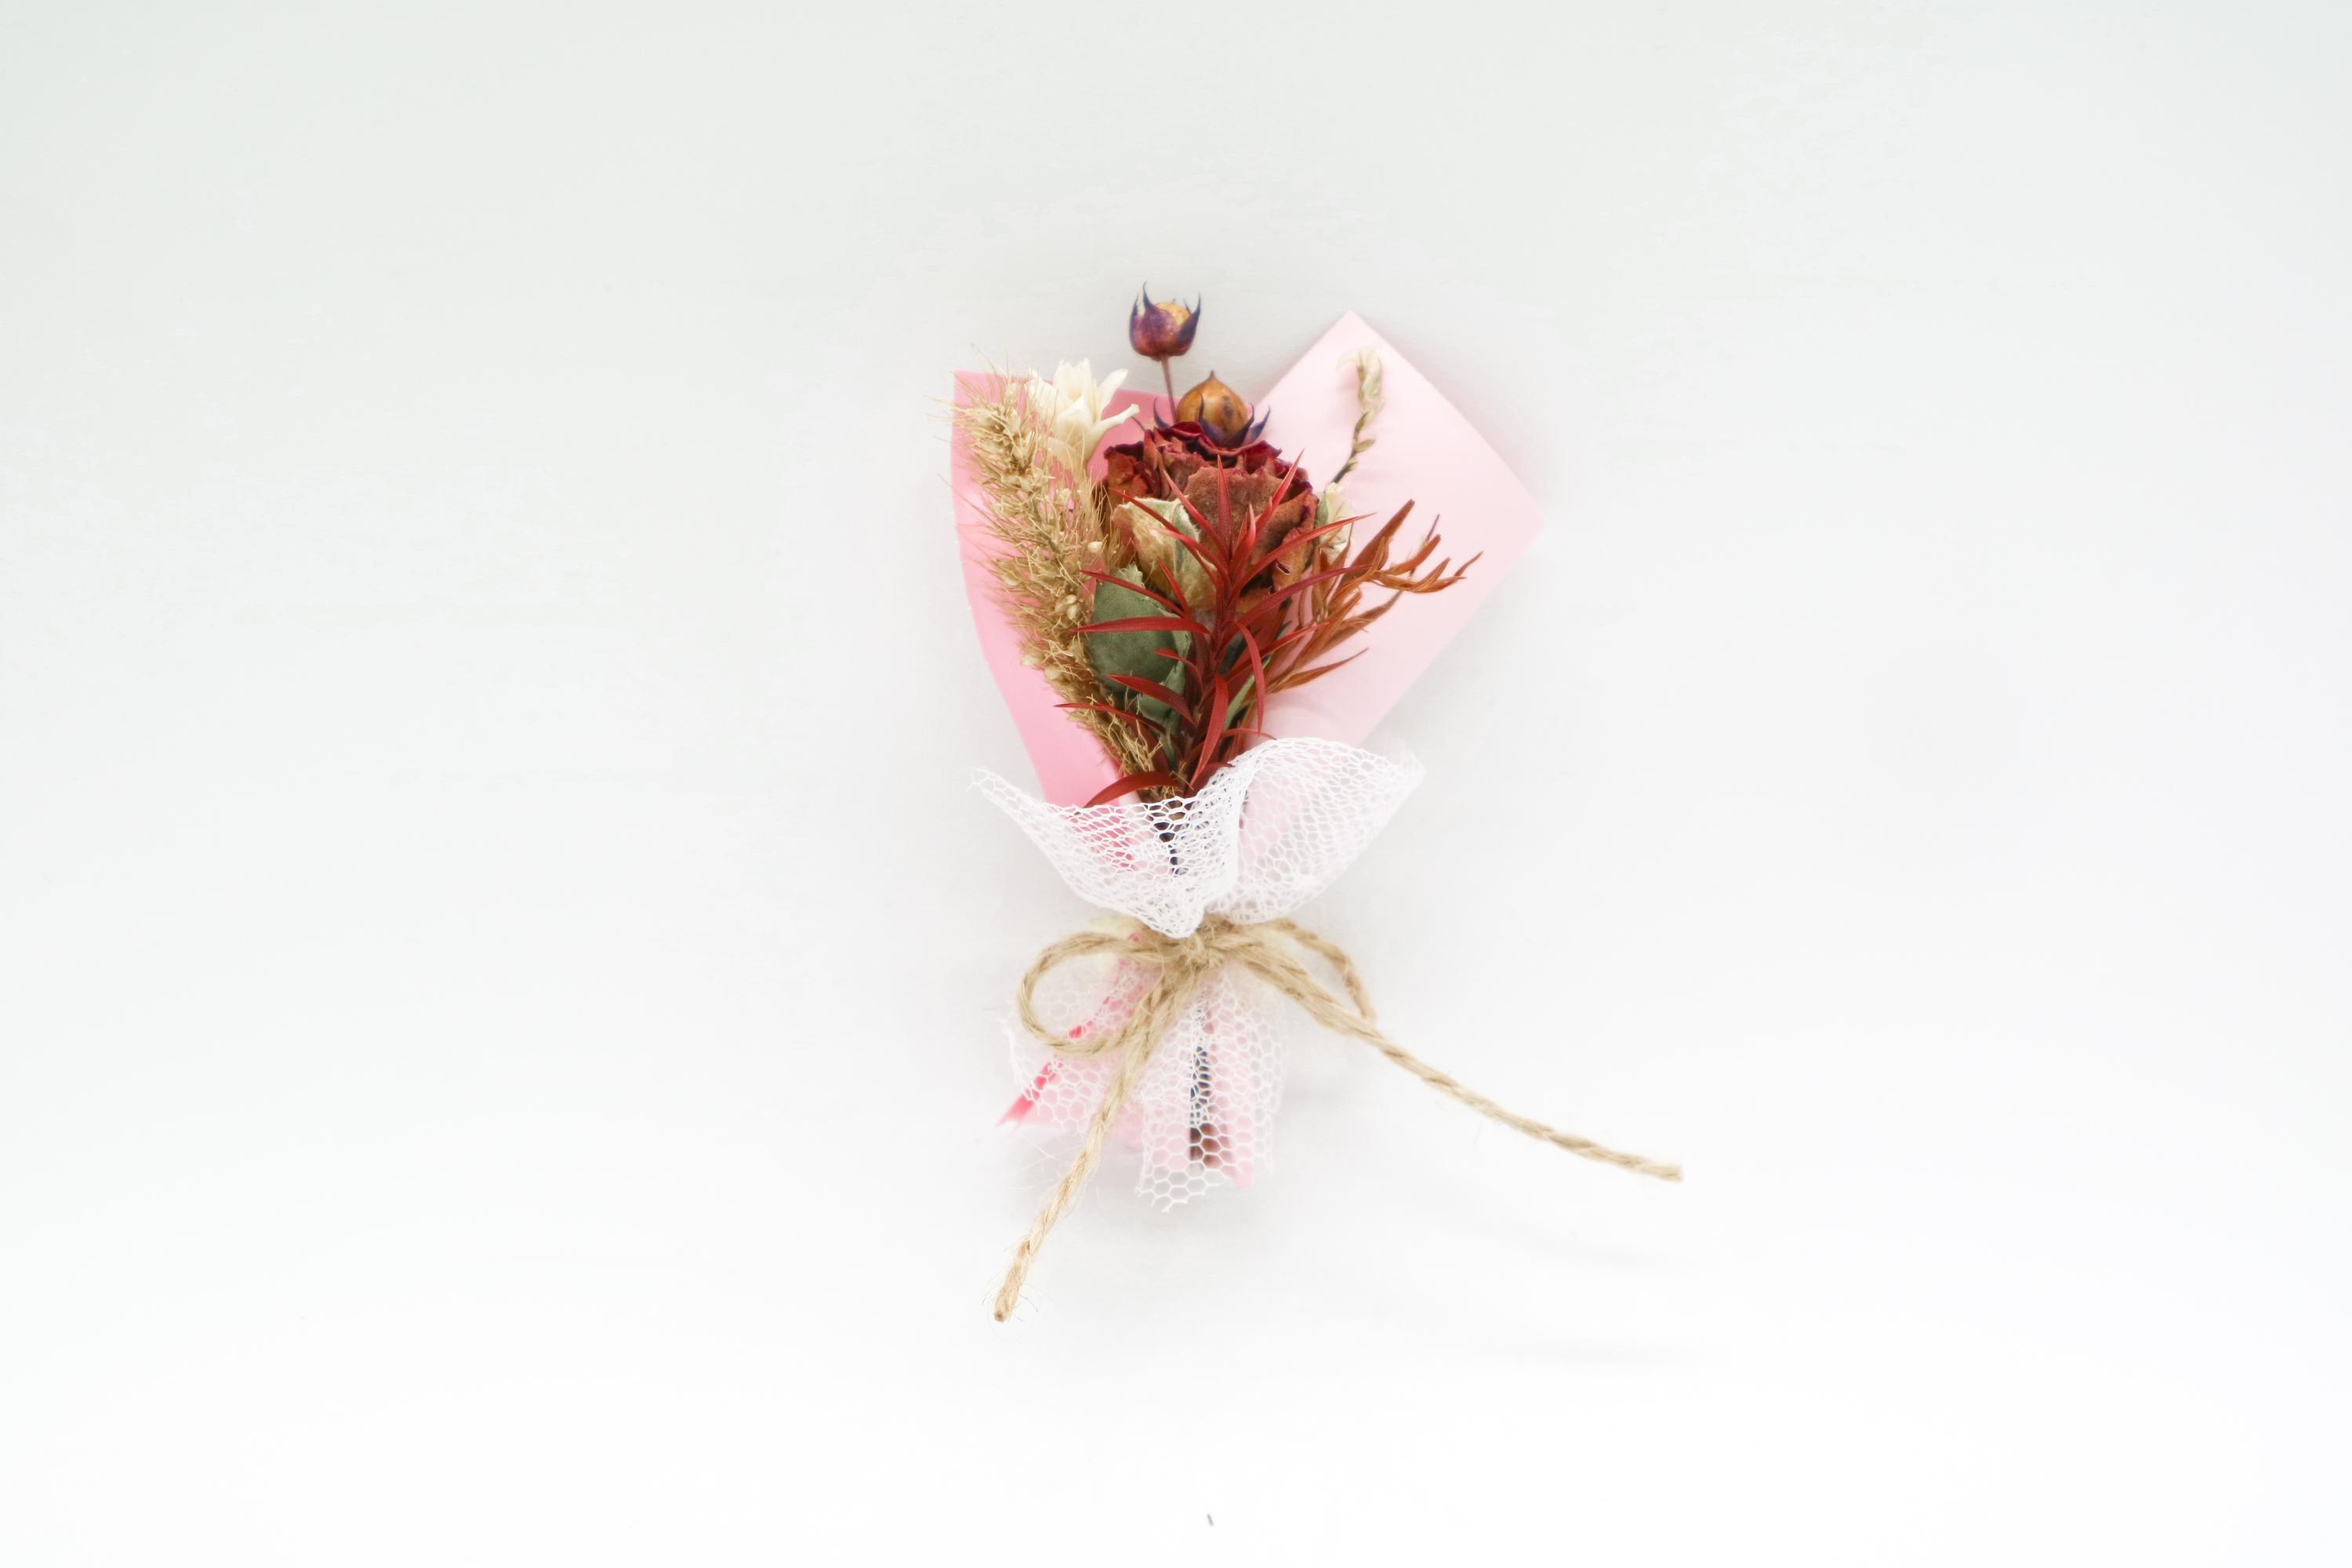 LUMI + Dried Flowers Bundle Package A